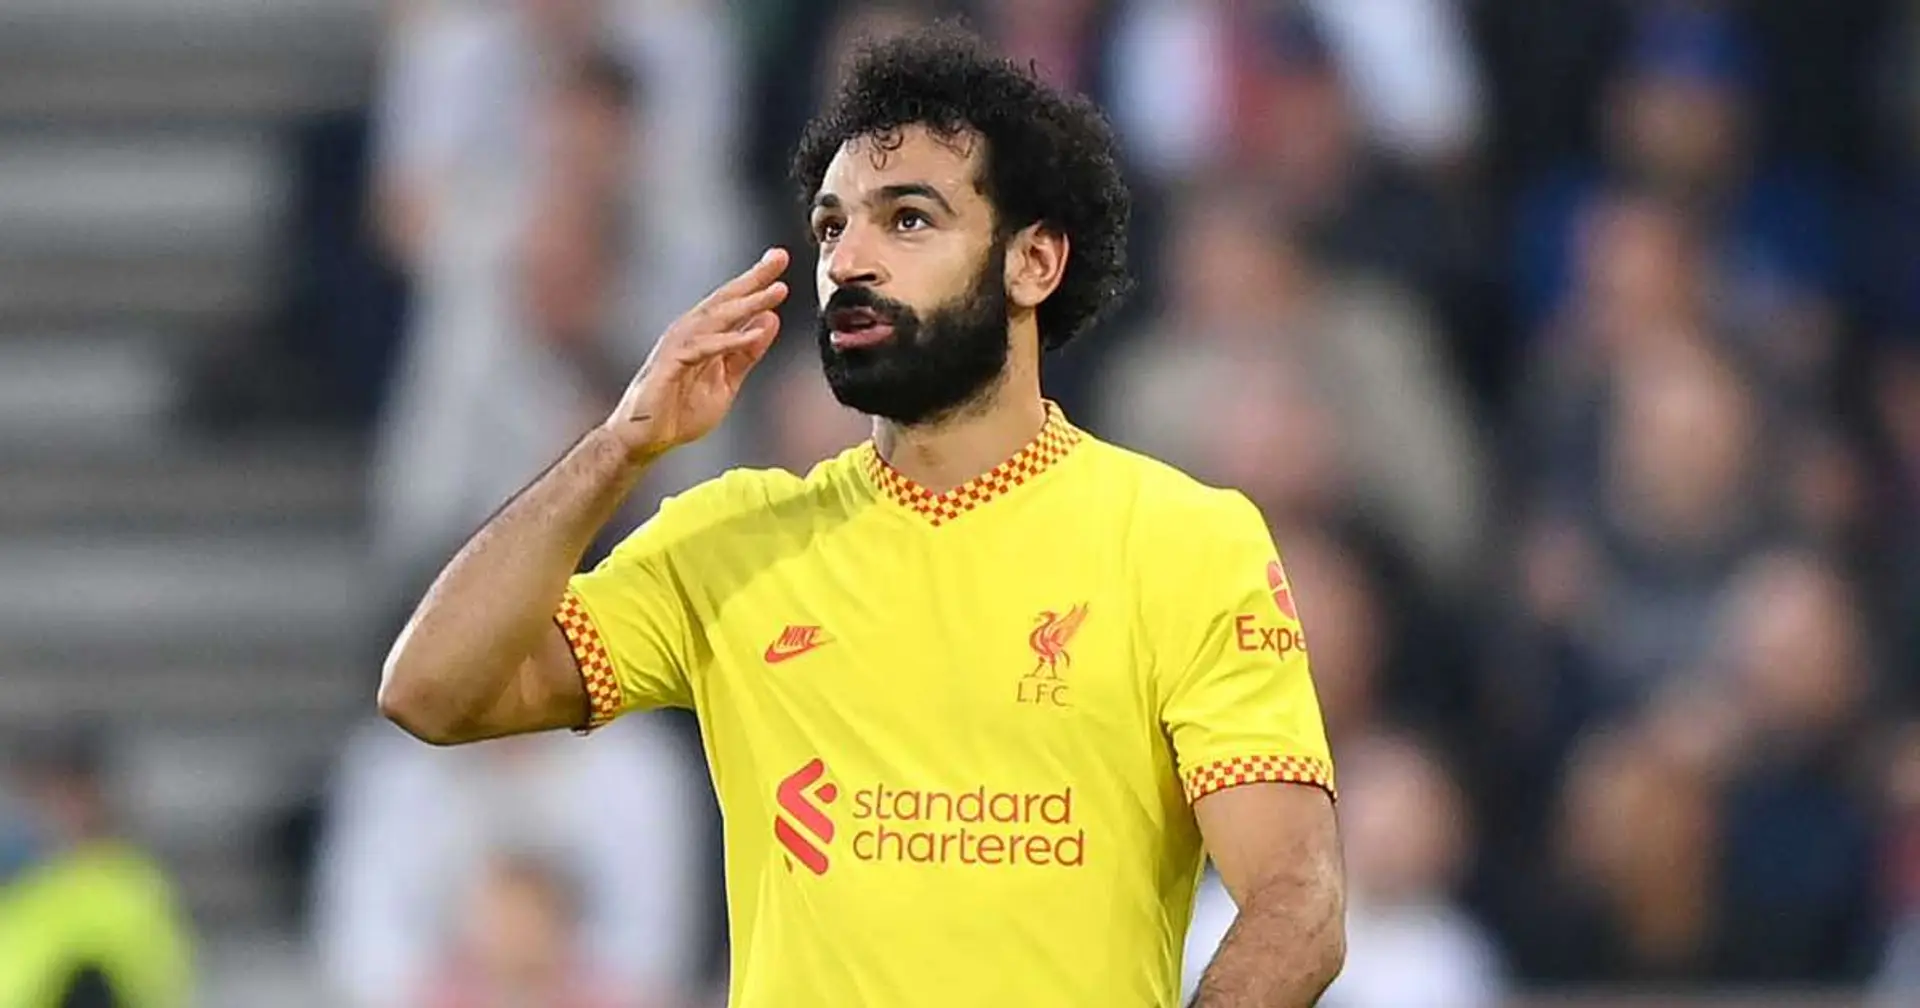 Mo Salah nominated for PL Player of the Month award for September